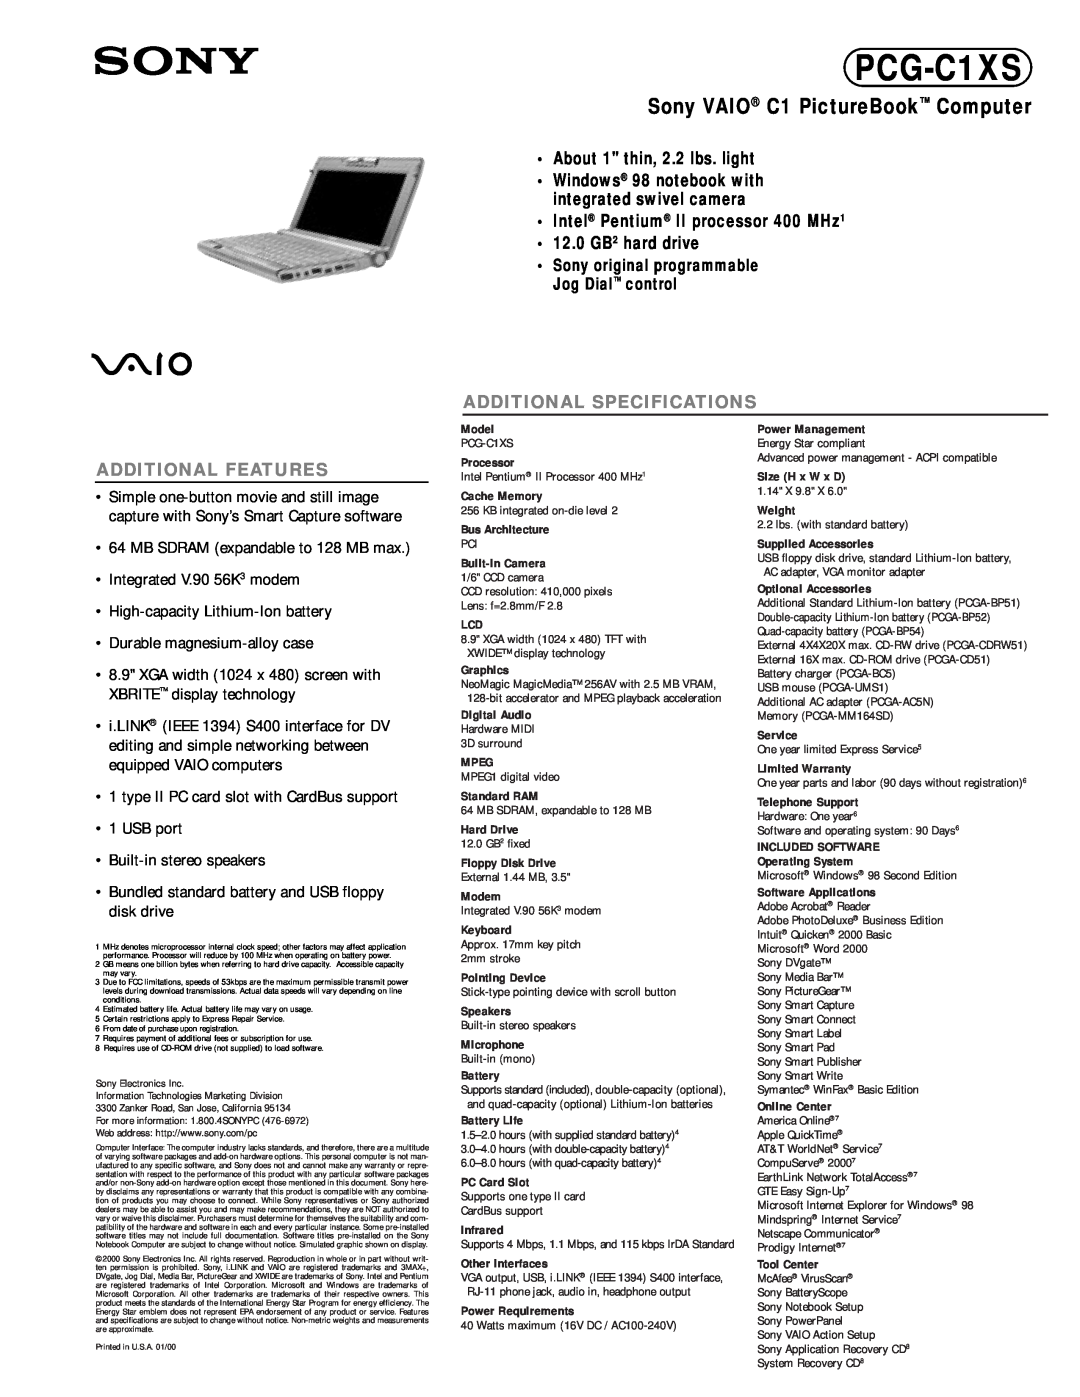 Sony PCG-C1XS warranty Sony VAIO C1 PictureBook Computer, About 1 thin, 2.2 lbs. light, Additional Specifications 